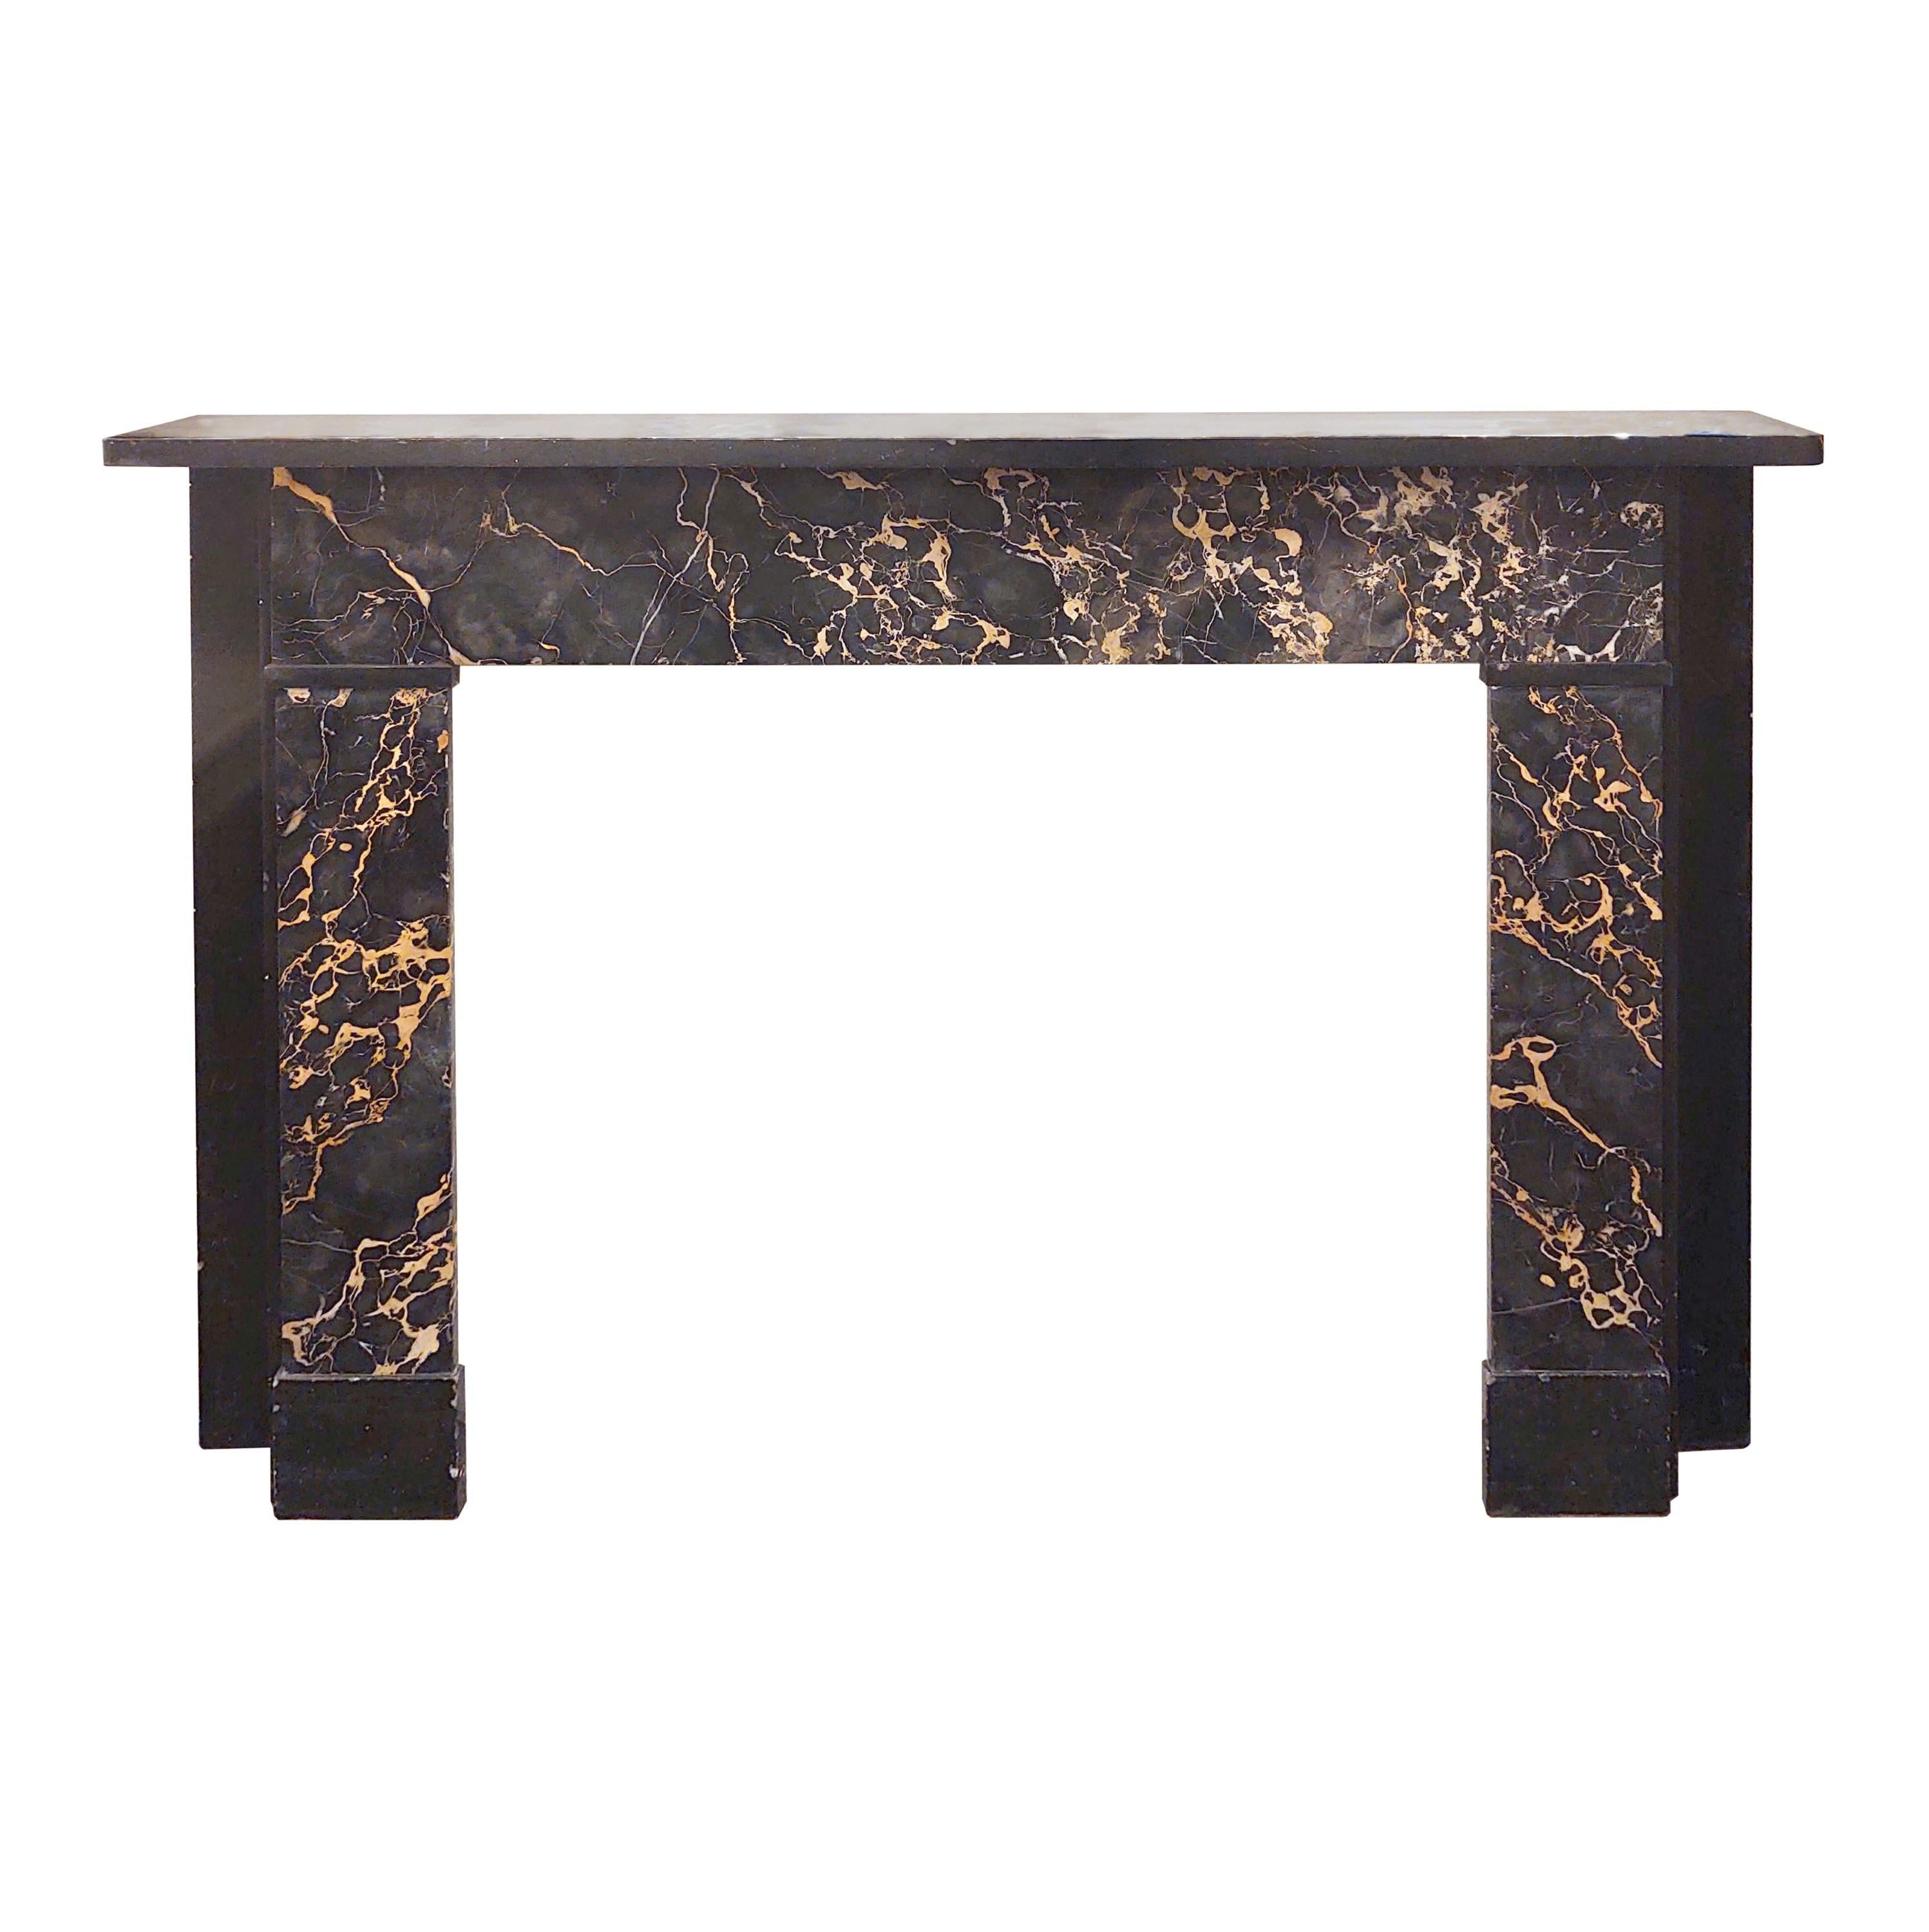 20th century Classic style marble mantel cut from Italian Portoro marble; known for its black and gold or black and silver veining. This mantle features Belgian black shelf and wall plates. Retrieved from a townhouse located in the West Village